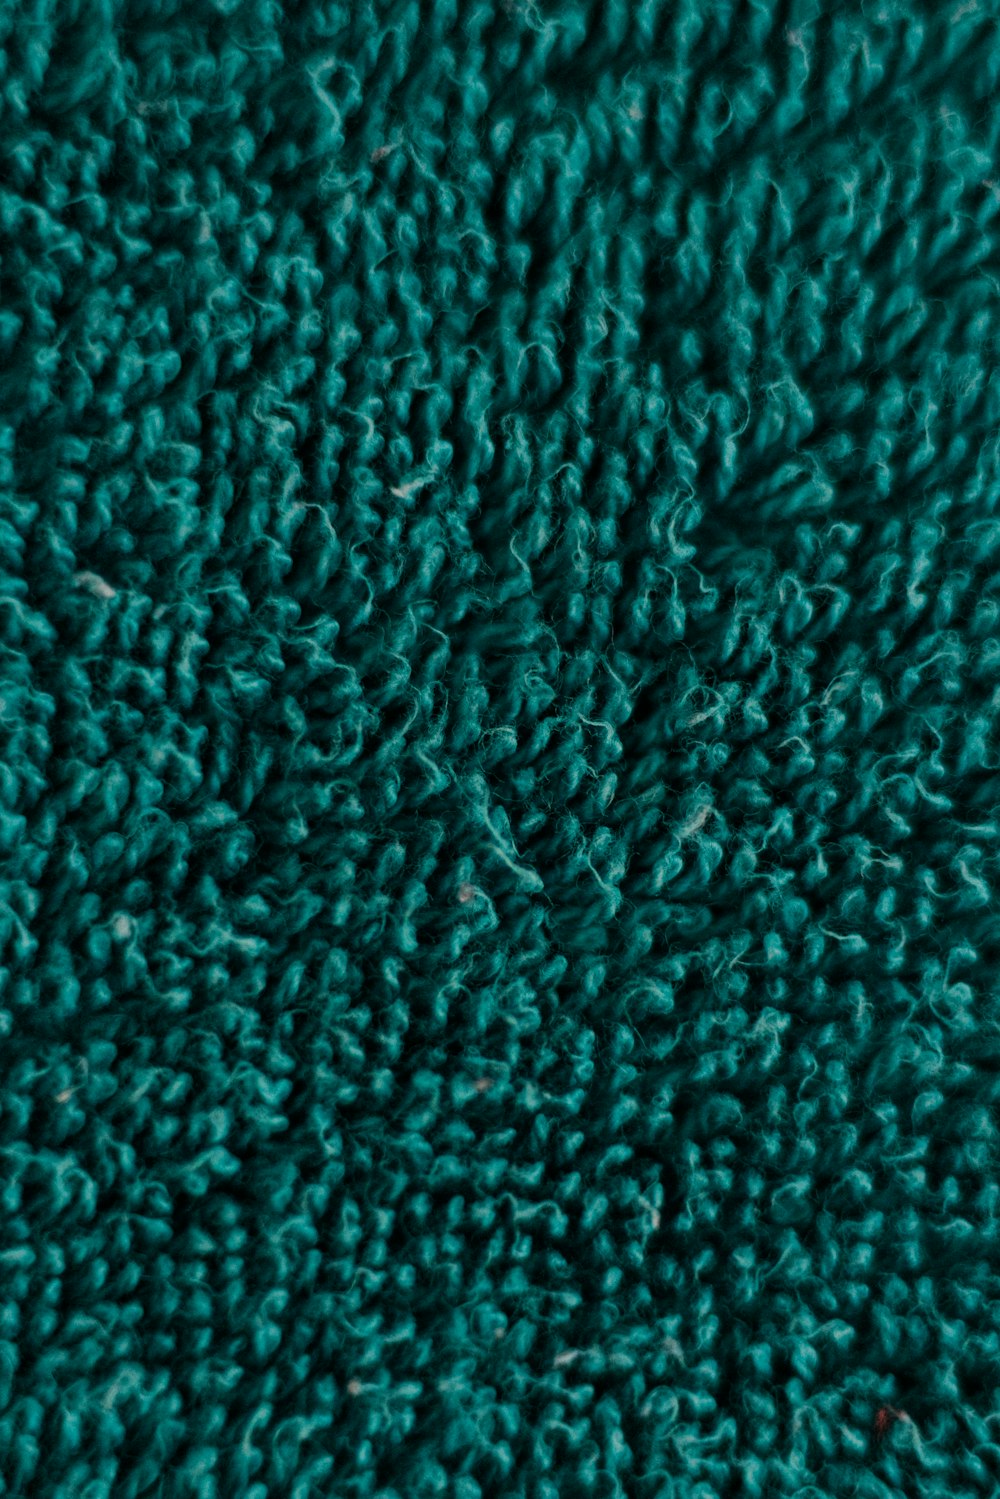 green and black knit textile